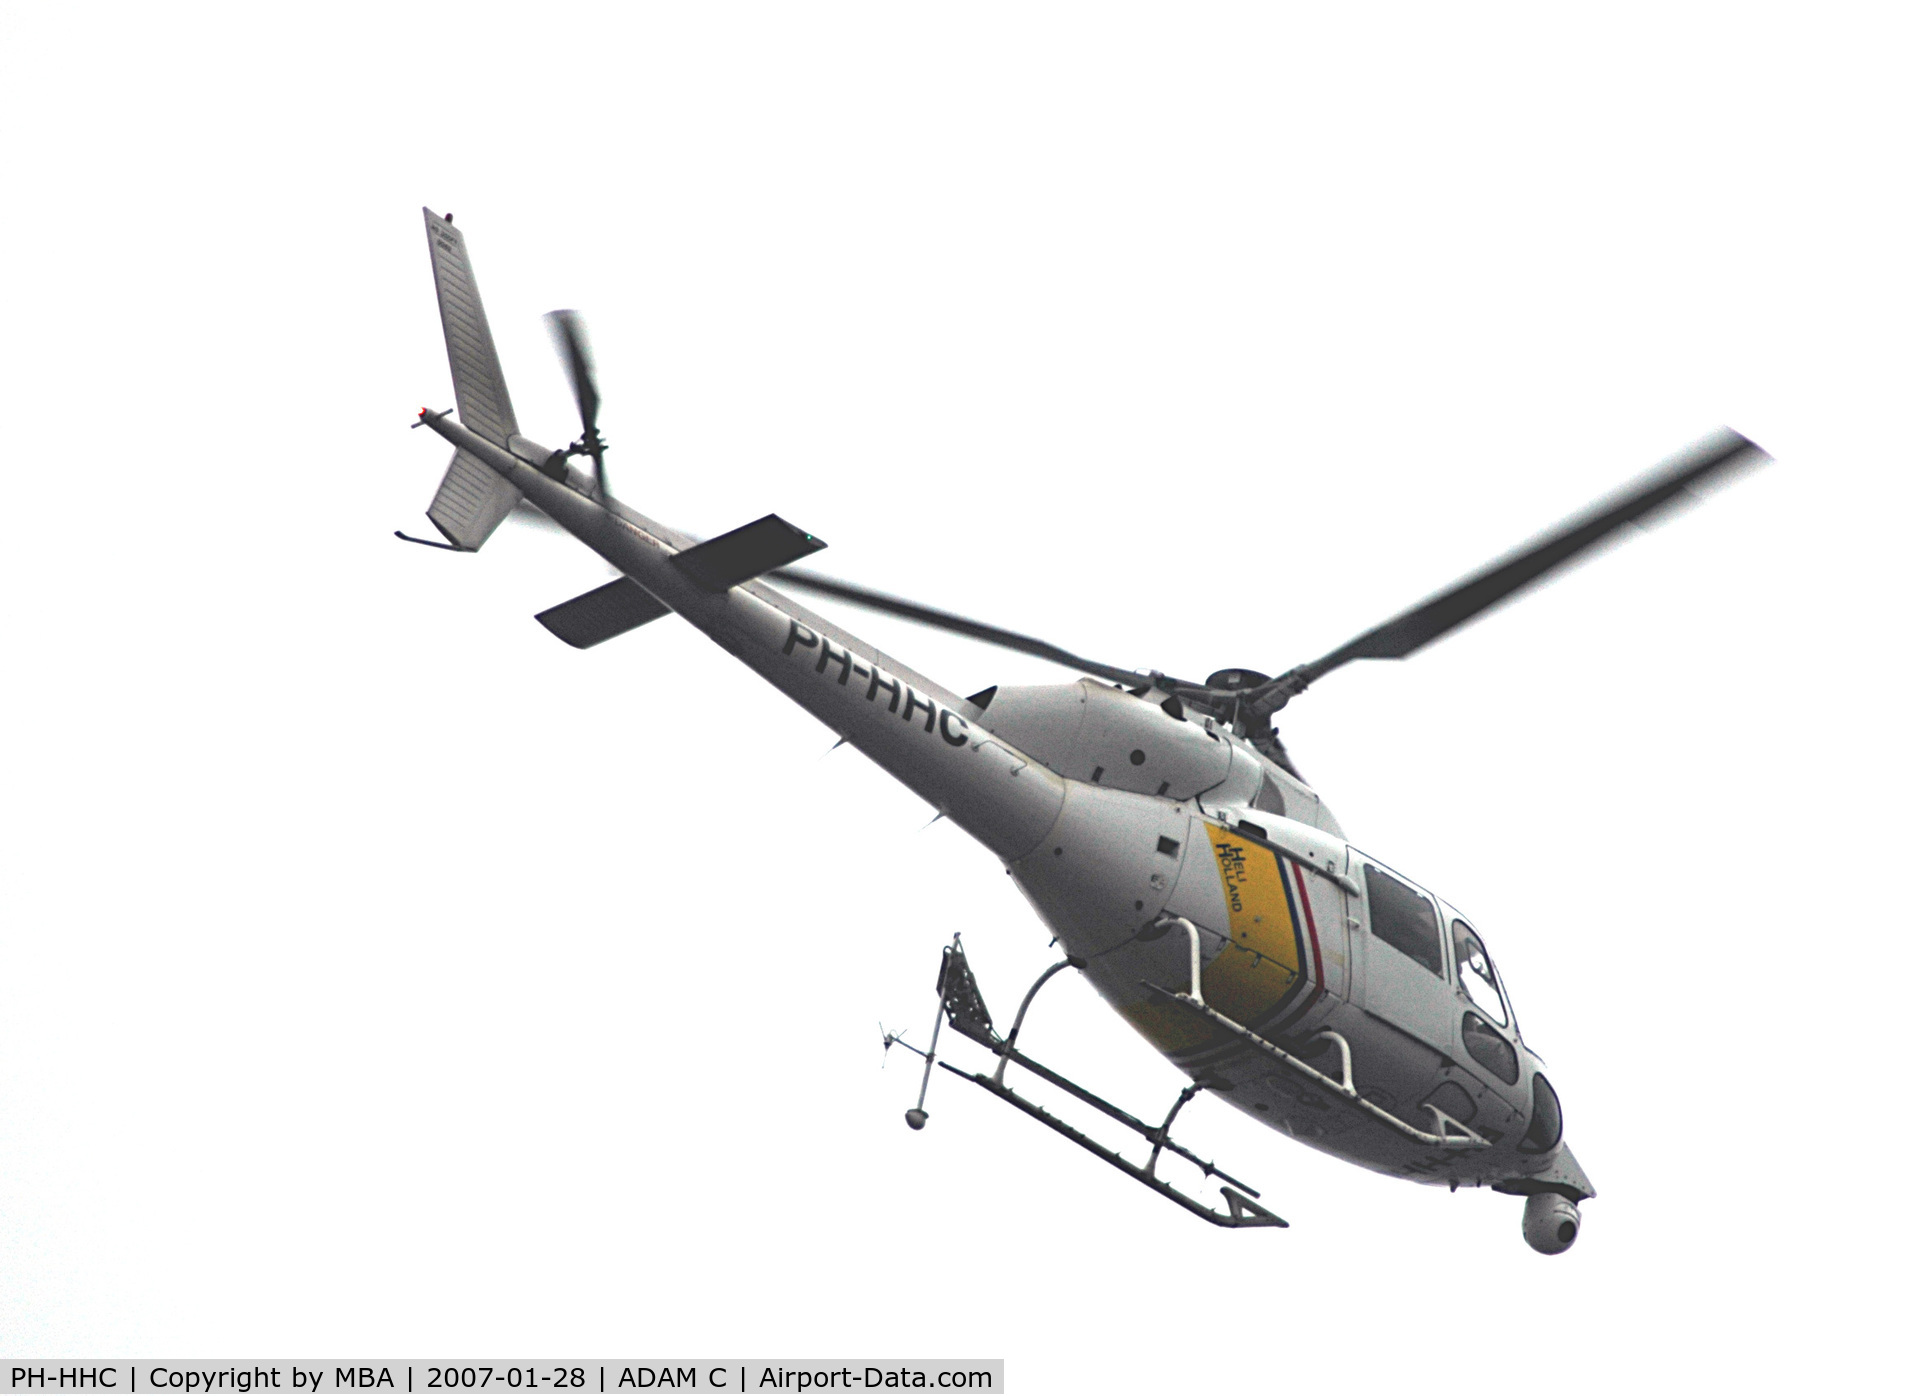 PH-HHC, Aerospatiale AS-355F-1 Ecureuil 2 C/N 5049, Why were you hovering so low? DONT DO THAT!